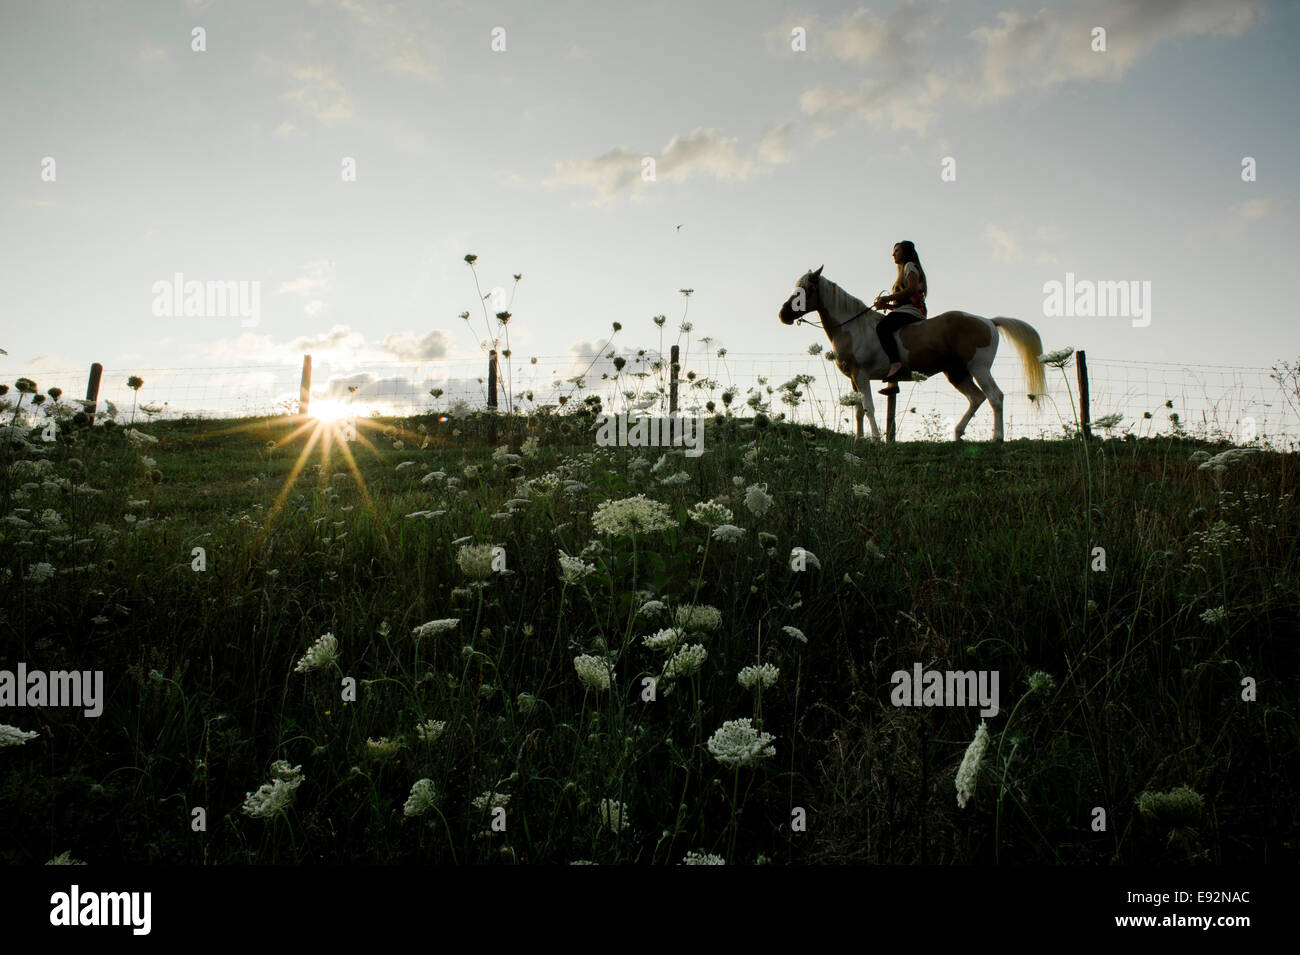 Silhouette of Young Woman Riding Horse on top of Hill, Wildflowers in Foreground Stock Photo